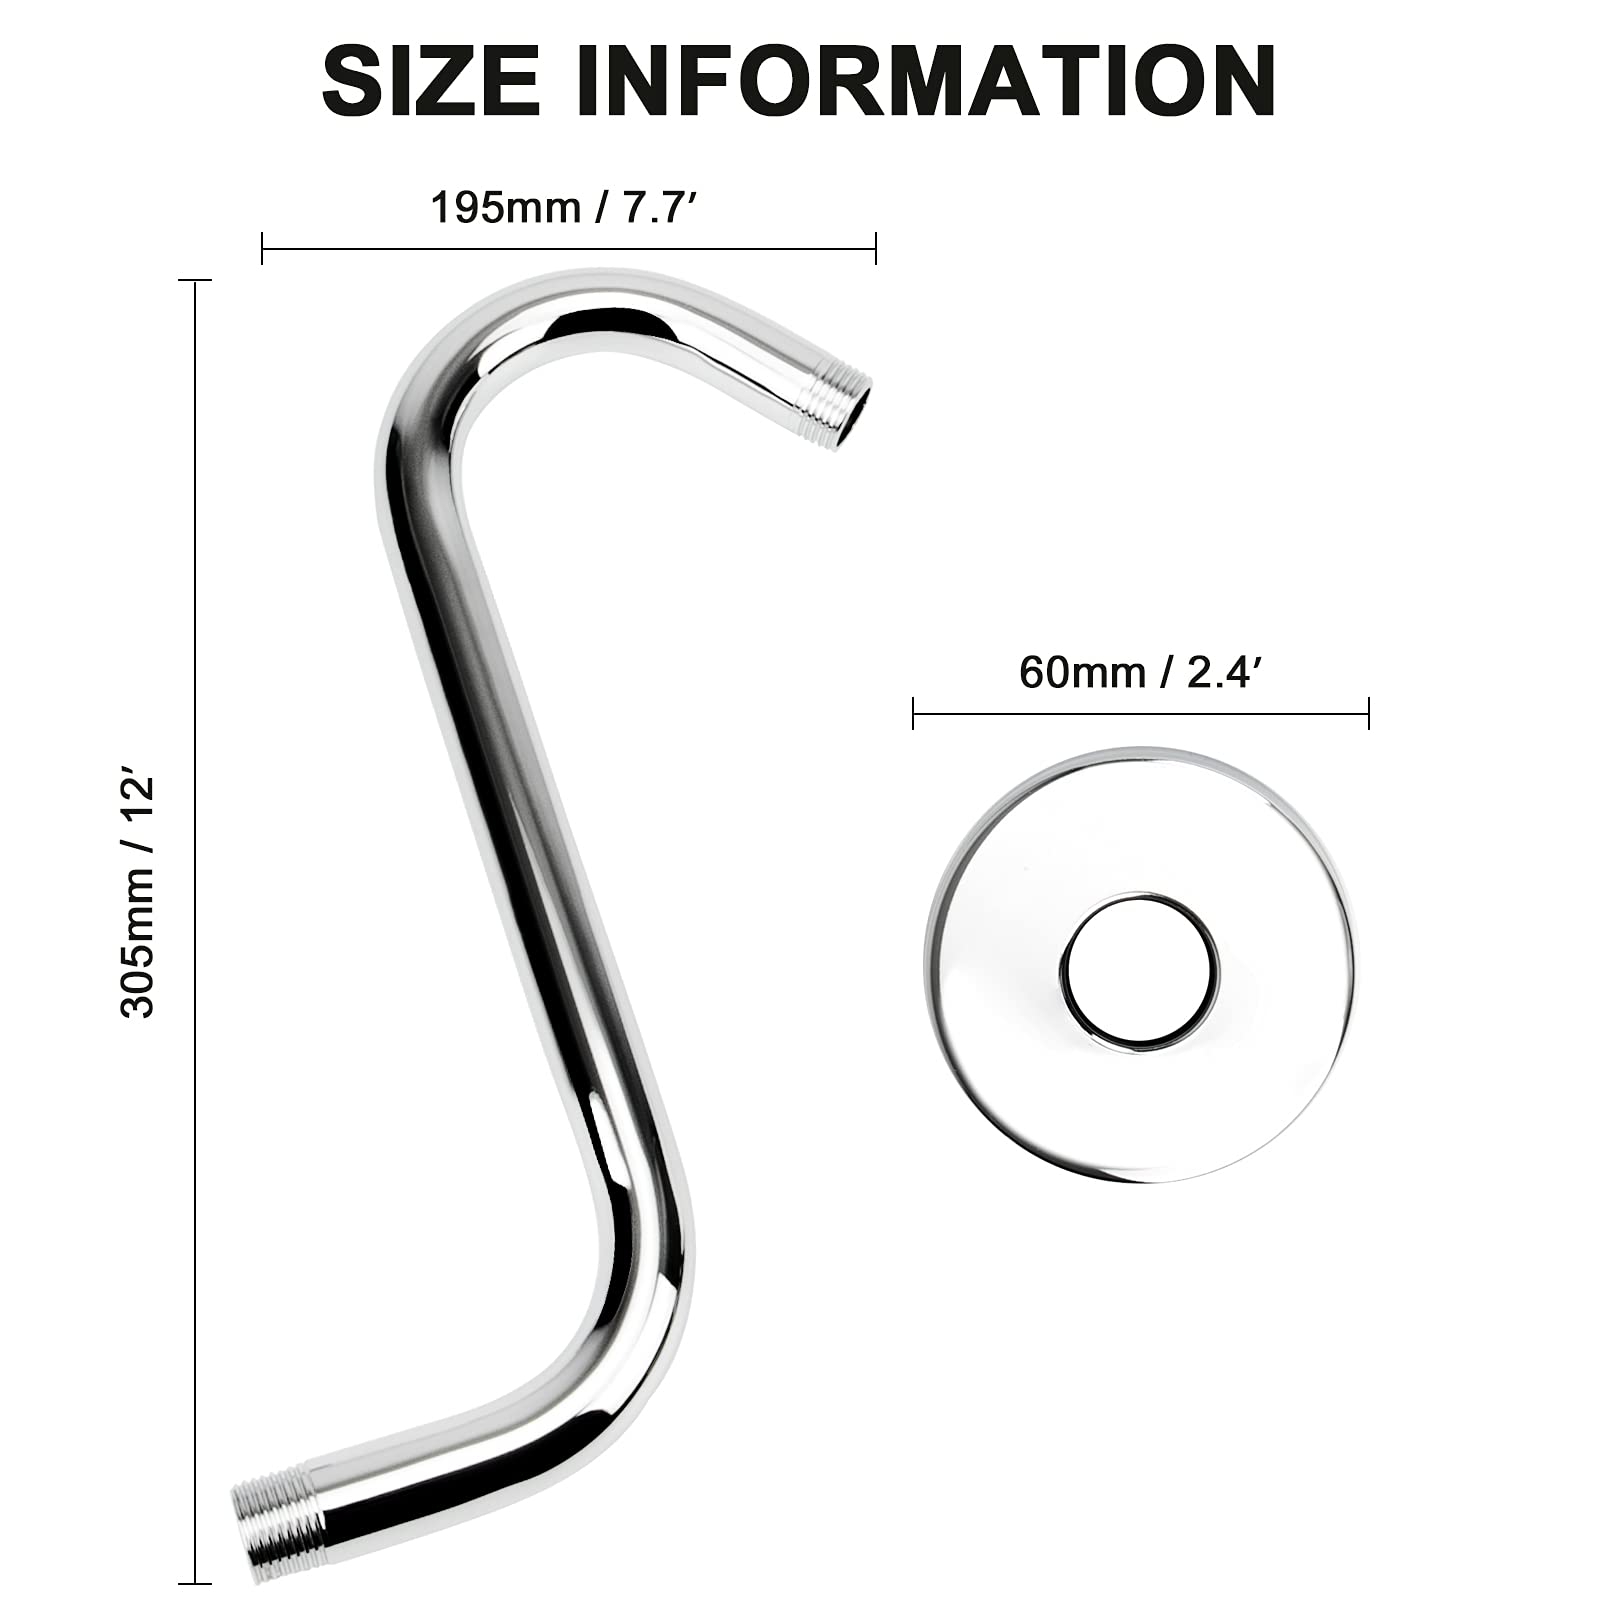 Nearmoon S Shaped Shower Head Riser Pipe, Shower Head Extender Arm with Flange, Standard 1/2" Connection- Bathroom Accessory, 12 Inch (1 Pack, Chrome)